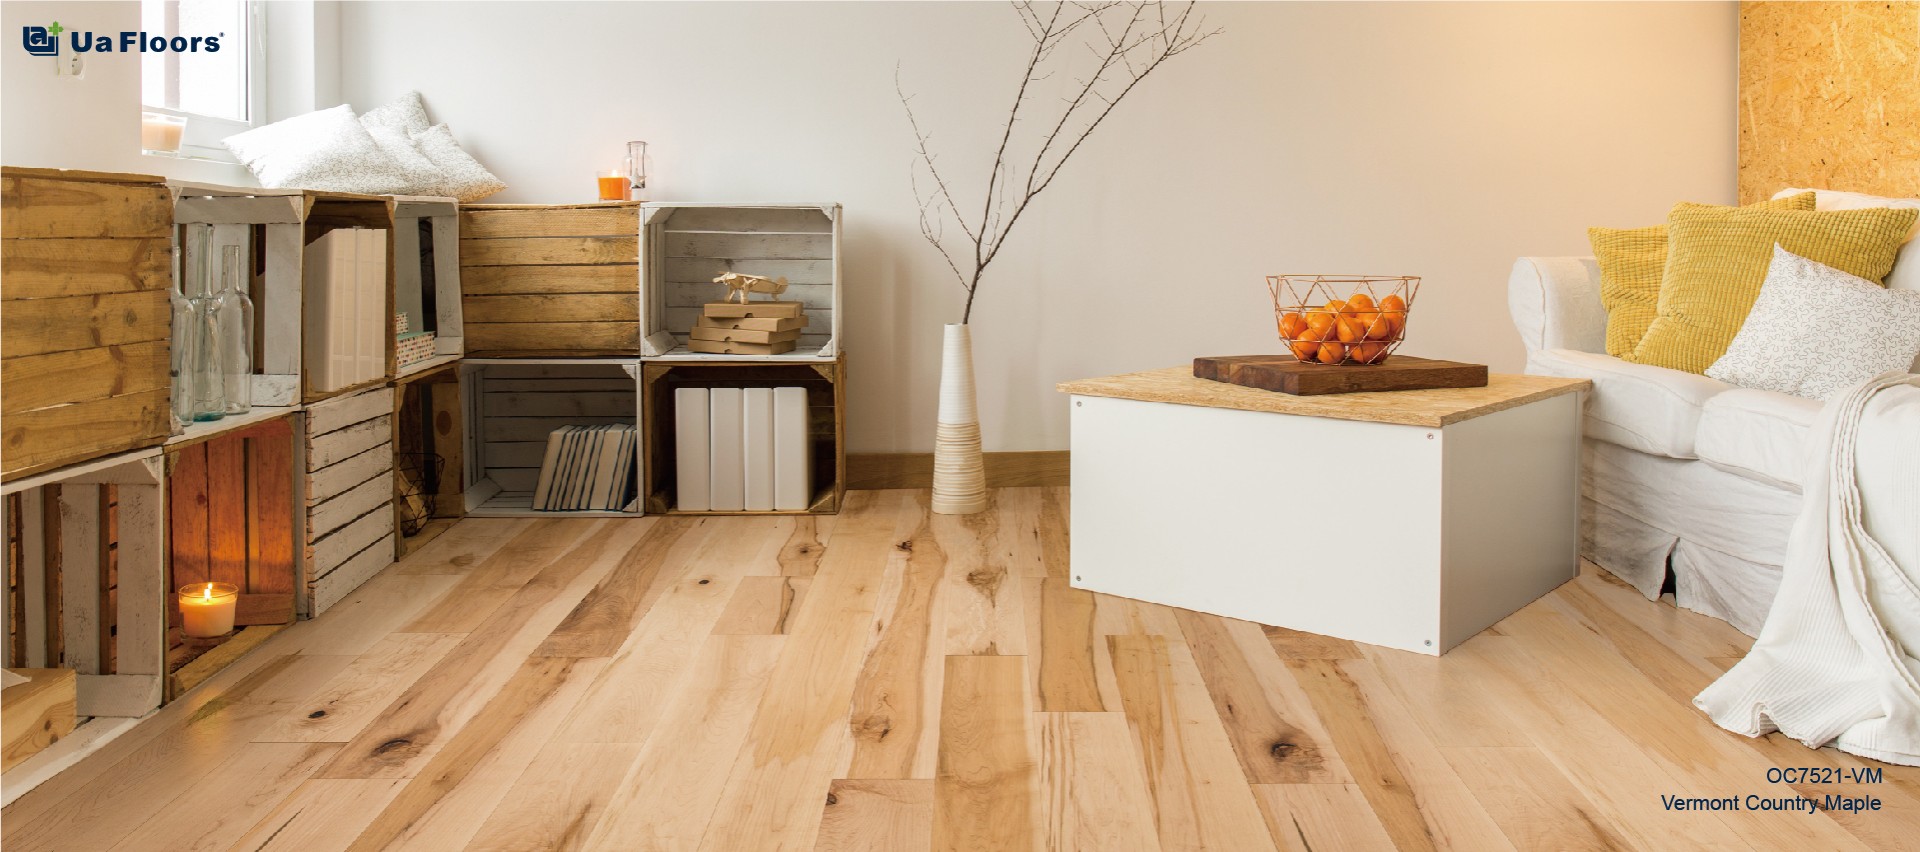 Stylish And Durable Maple Engineered, What Kind Of Hardwood Floor Should I Get